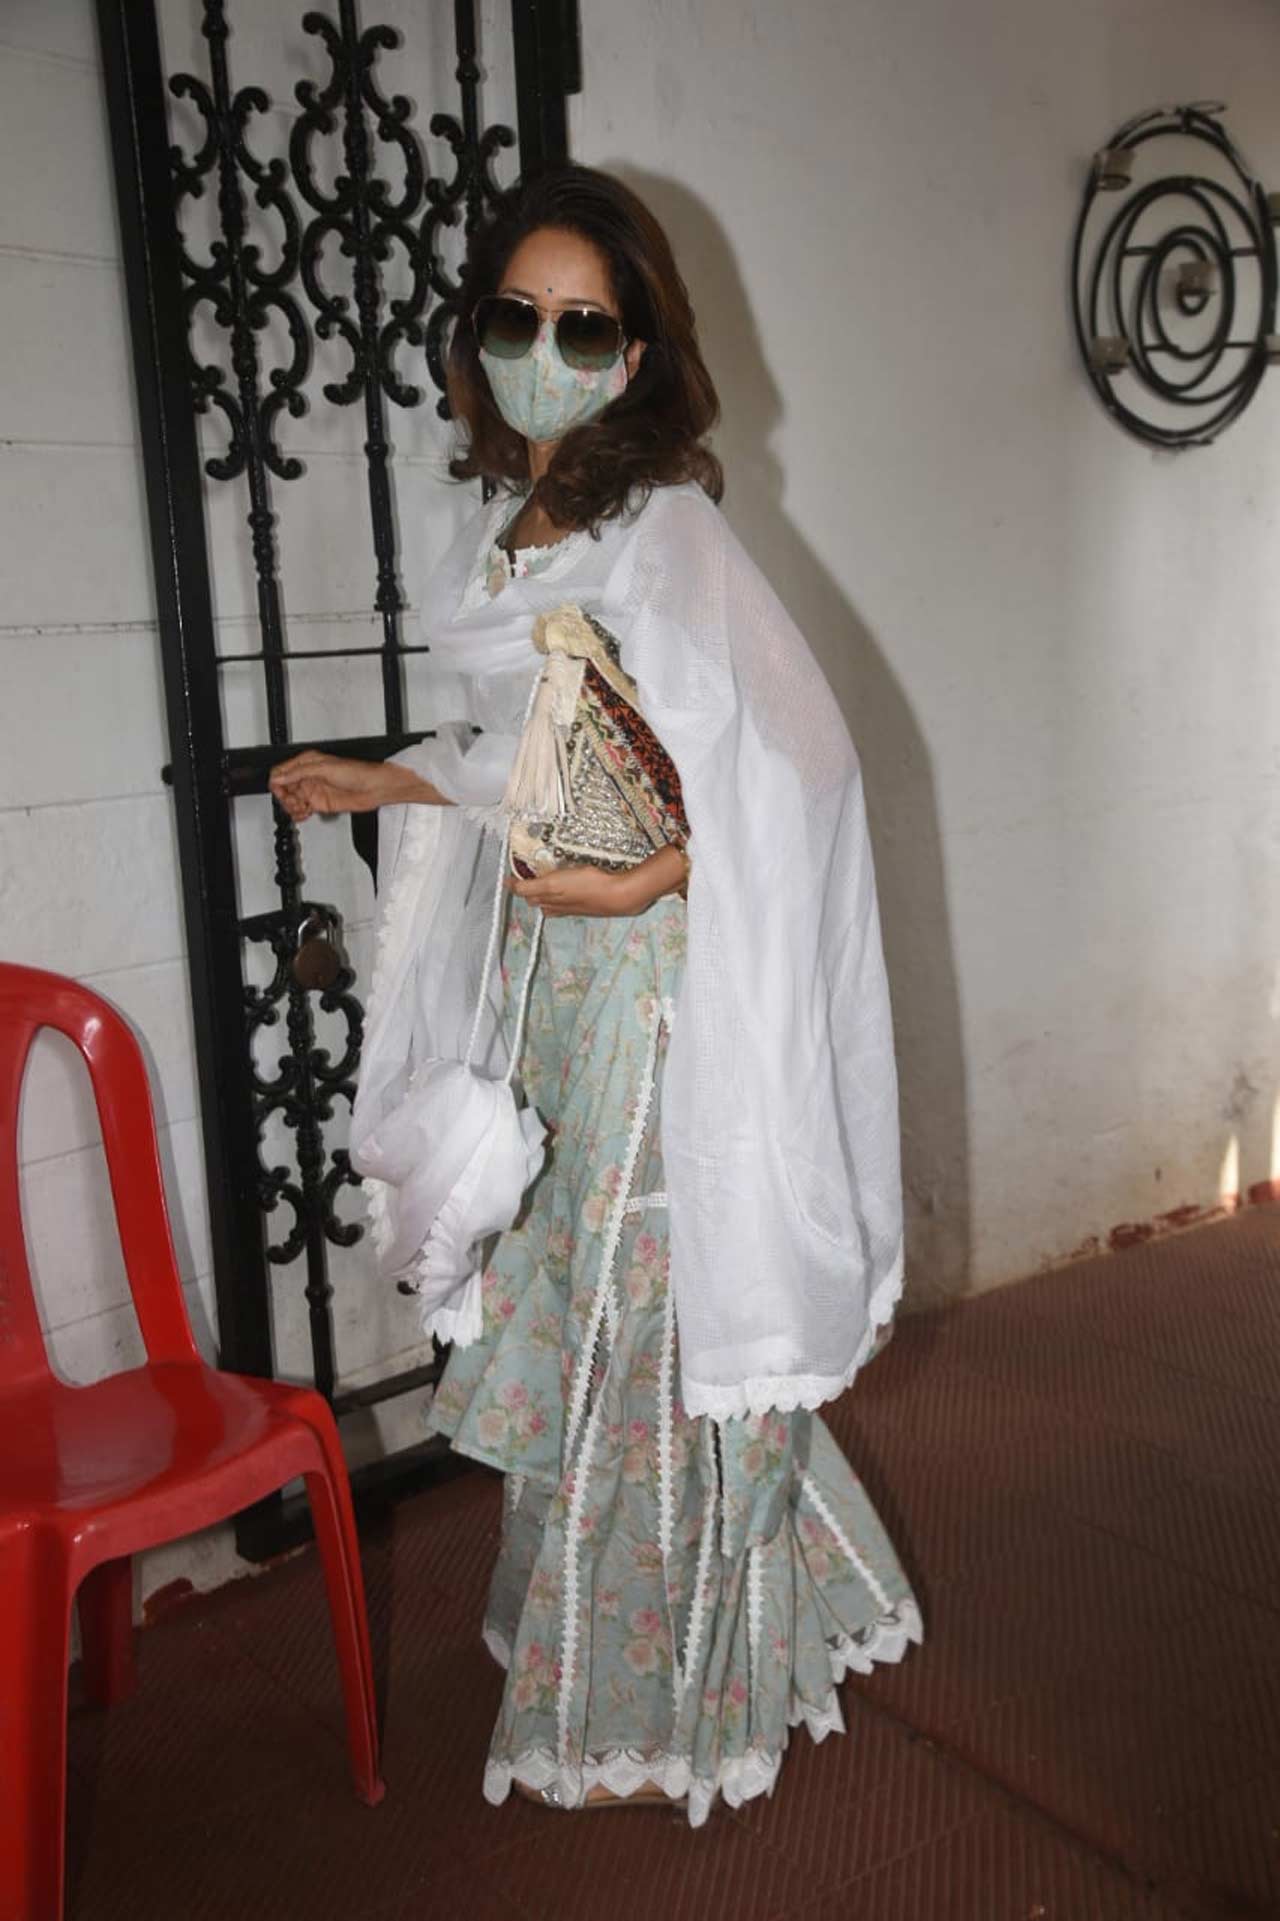 Raj Kaushal's last rites were attended by his friends from the industry including Huma Qureshi, Apurva Agnihotri, Samir Soni and Ashish Chaudhary among others on Wednesday. In picture: Vidya Malavade, who is good friends with Mandira Bedi, was also snapped at the prayer meet ceremony hosted at their residence.